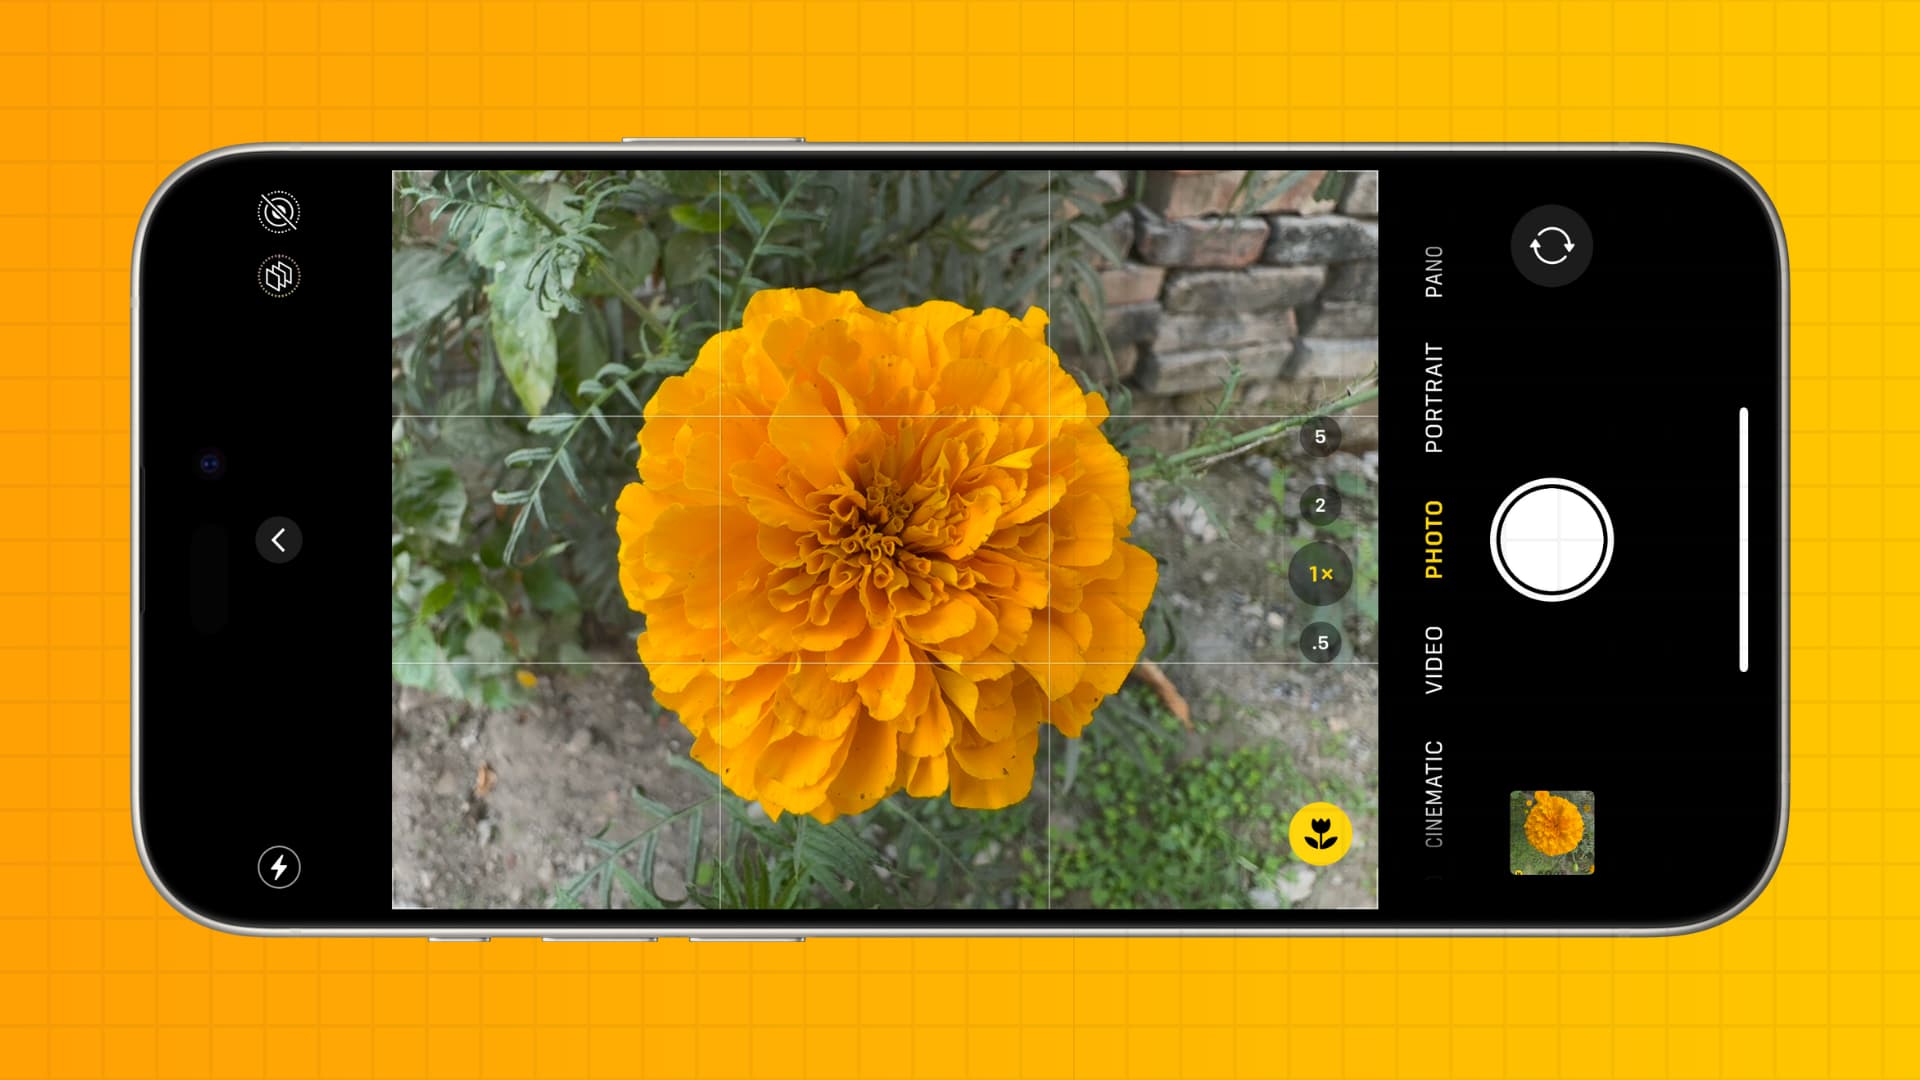 Taking photo of a yellow flower on iPhone